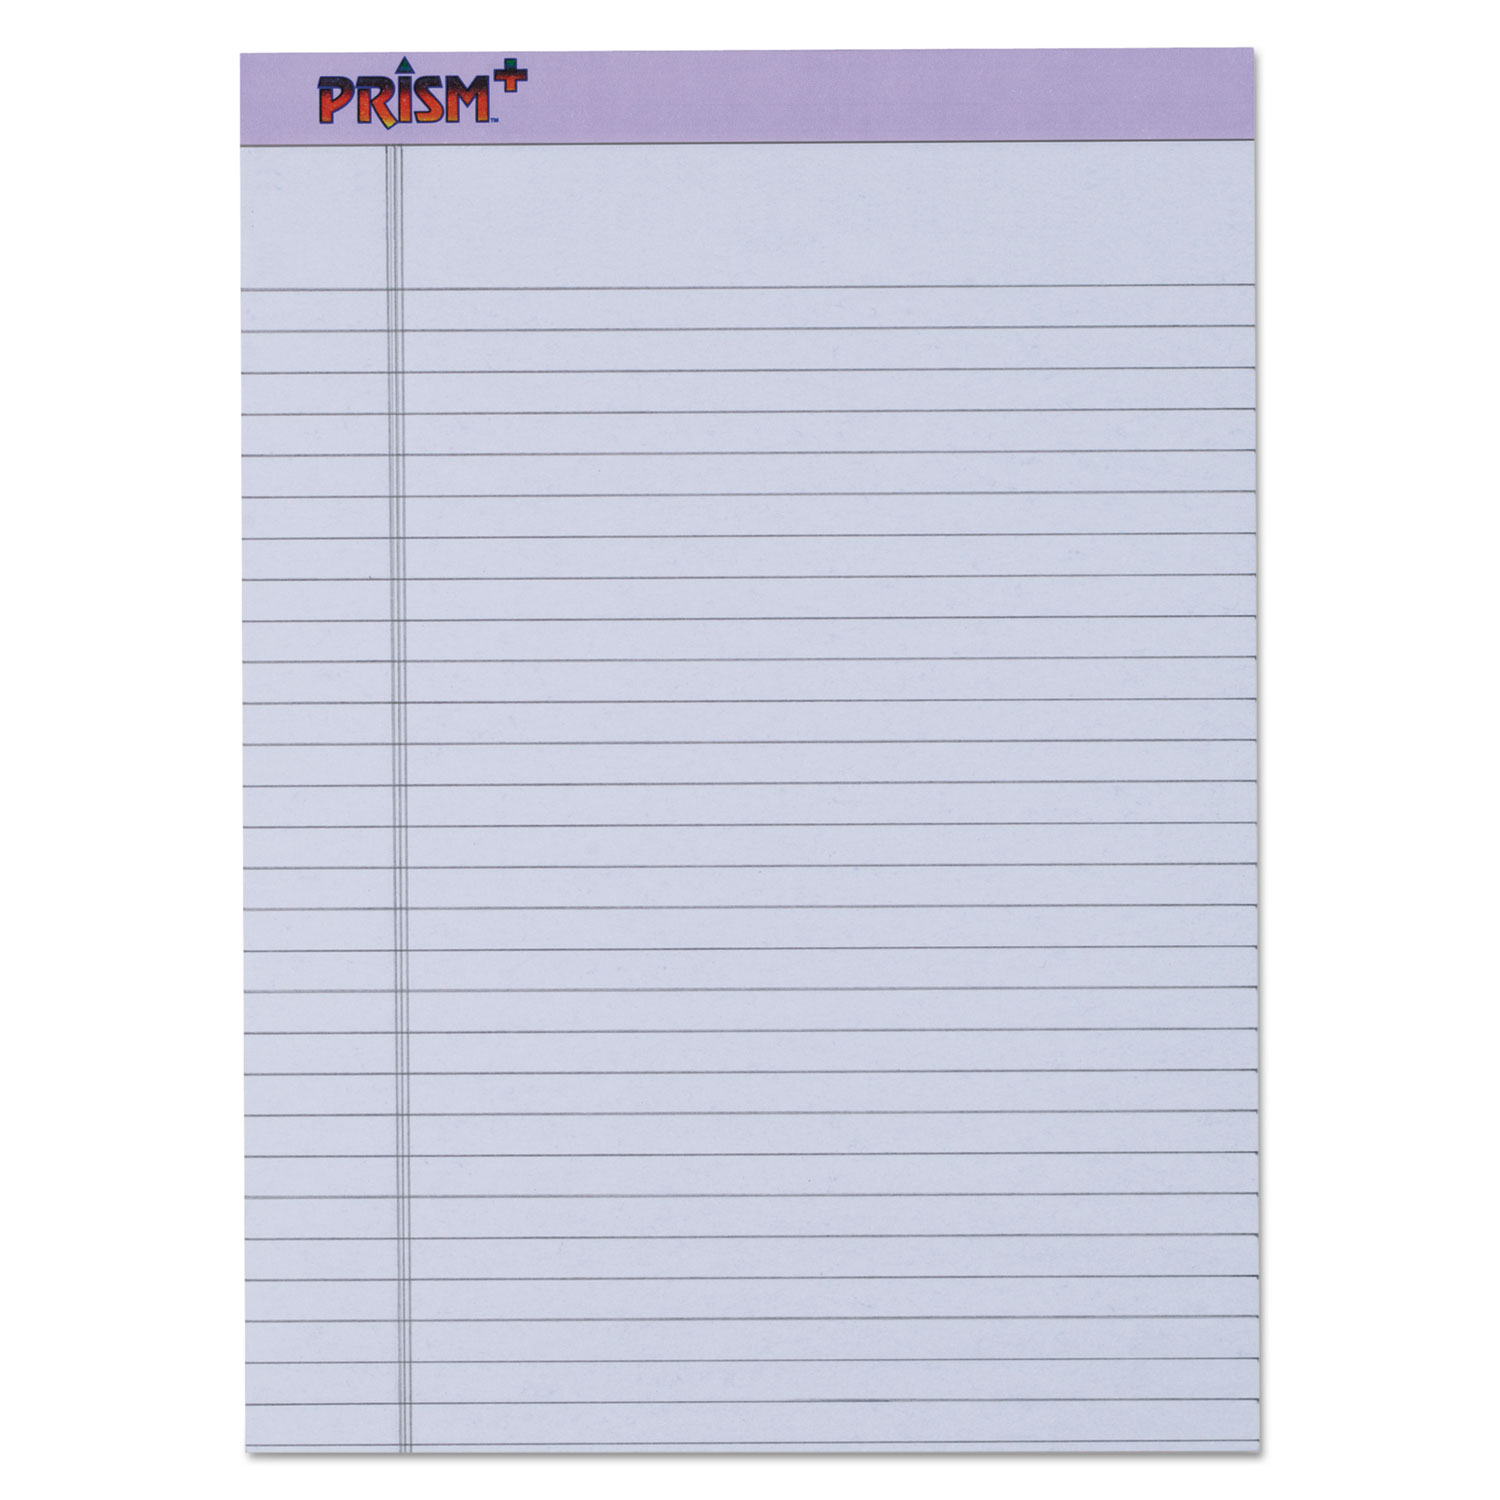  TOPS 63140 Prism + Colored Writing Pad, Wide/Legal Rule, 8.5 x 11.75, Orchid, 50 Sheets, 12/Pack (TOP63140) 